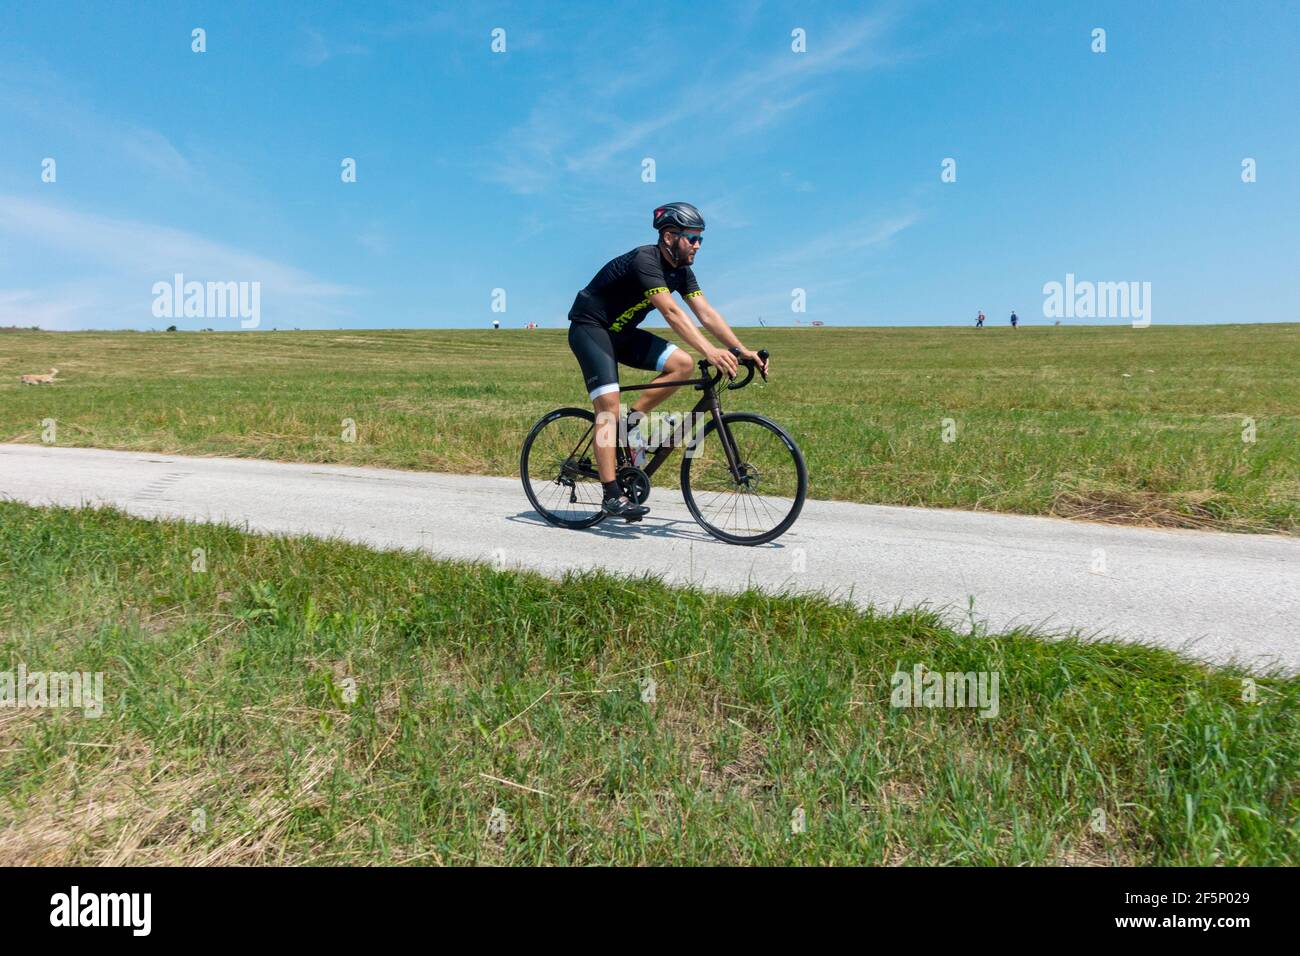 Single cyclist on rural road, active lifestyle, man cycling alone bike scene Stock Photo